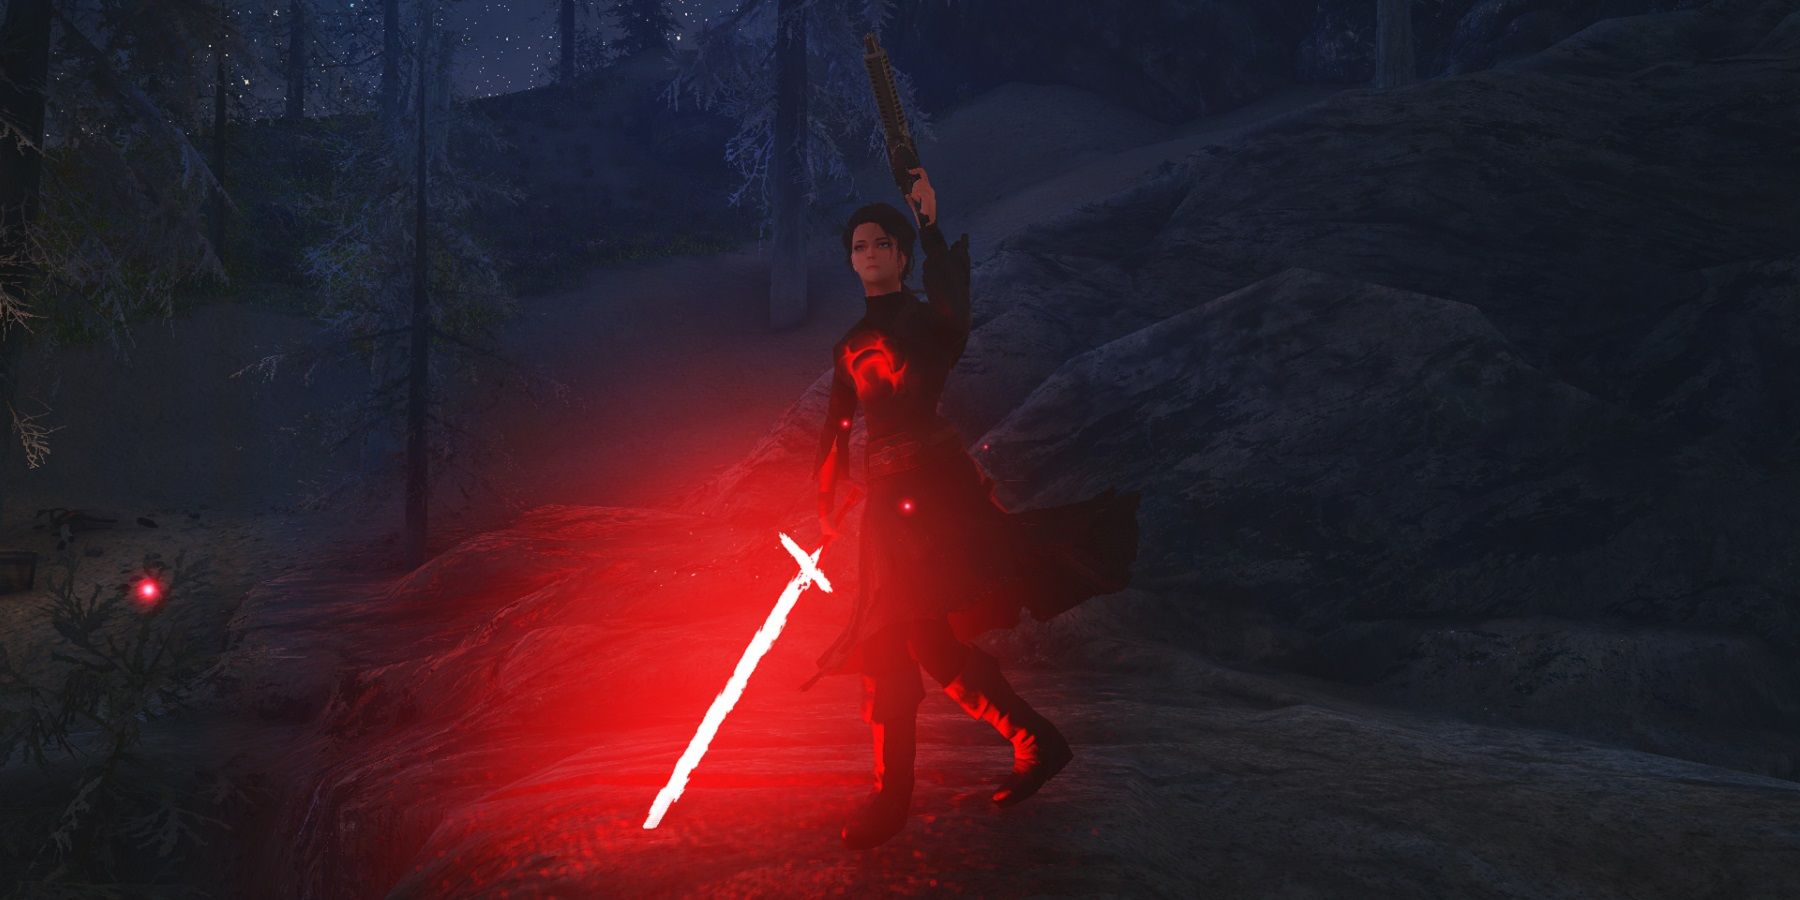 Image from Skyrim showing the player holding a red crossguard lightsaber from Star Wars.